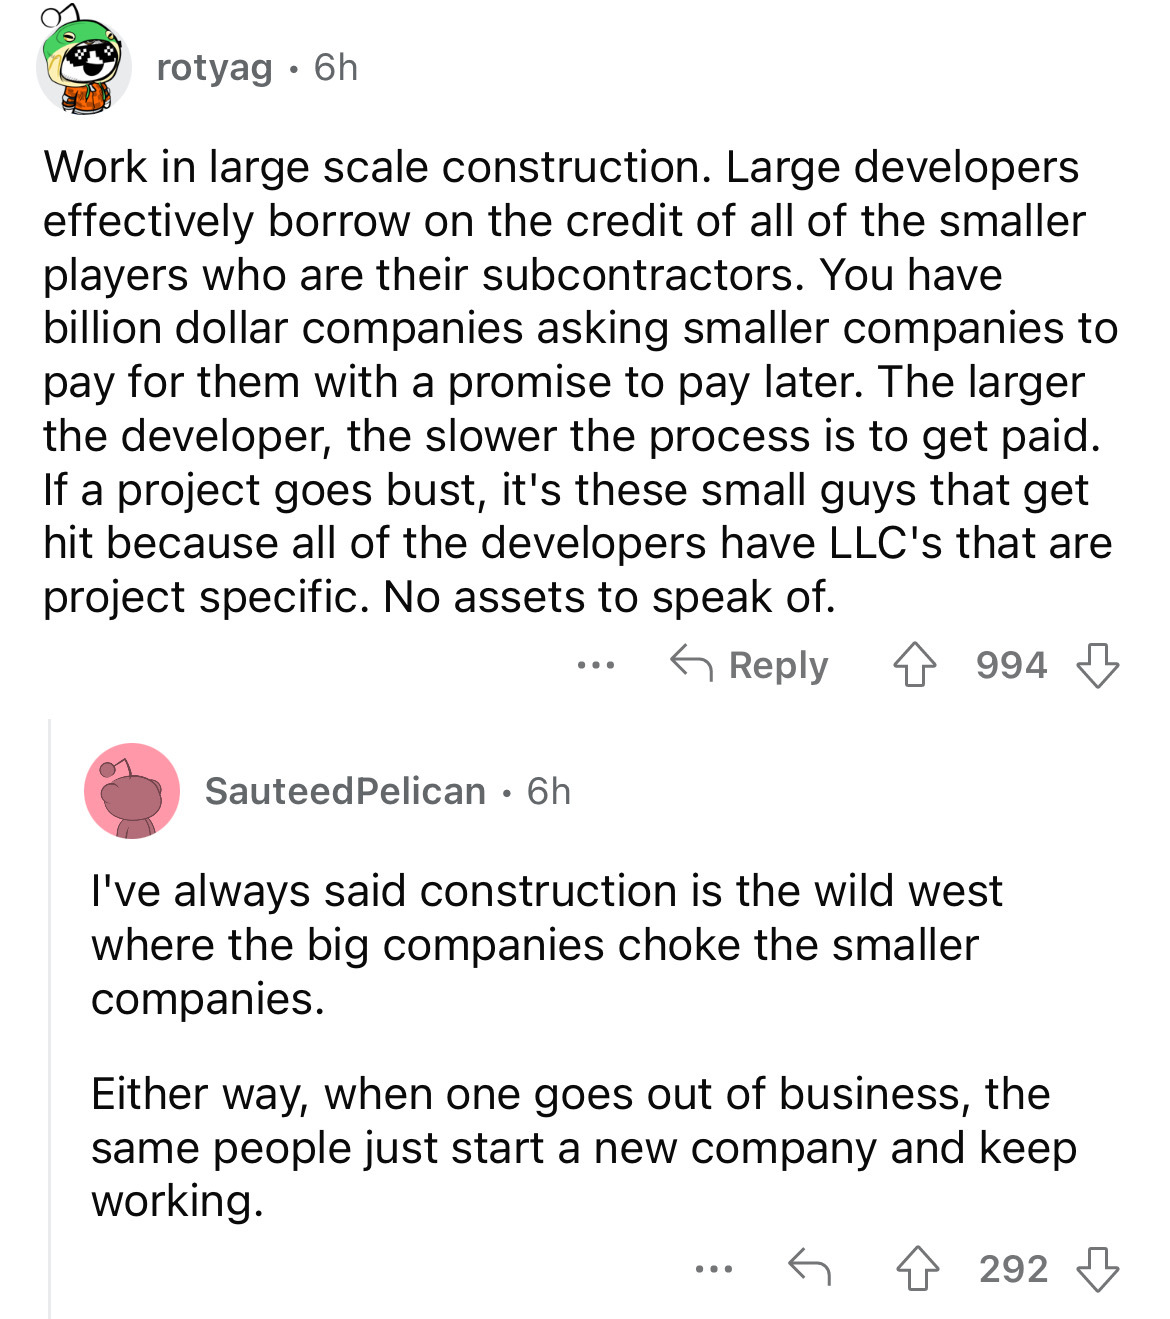 document - rotyag. 6h Work in large scale construction. Large developers effectively borrow on the credit of all of the smaller players who are their subcontractors. You have billion dollar companies asking smaller companies to pay for them with a promise